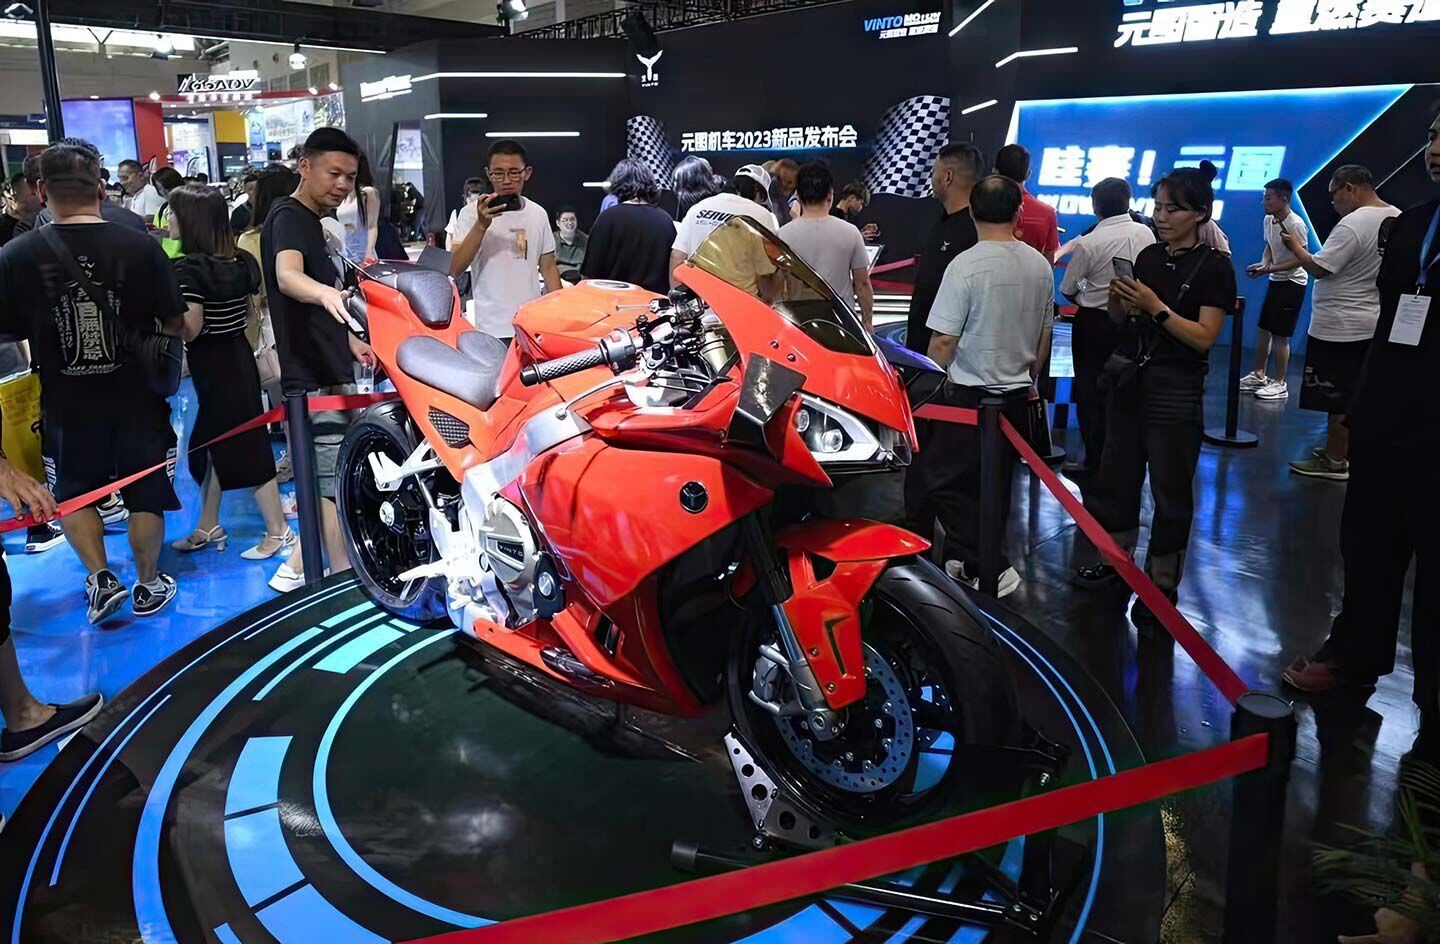 The recent CIMA show in China proved that companies from that country are building four-cylinder sportbikes at an exhilarating rate.